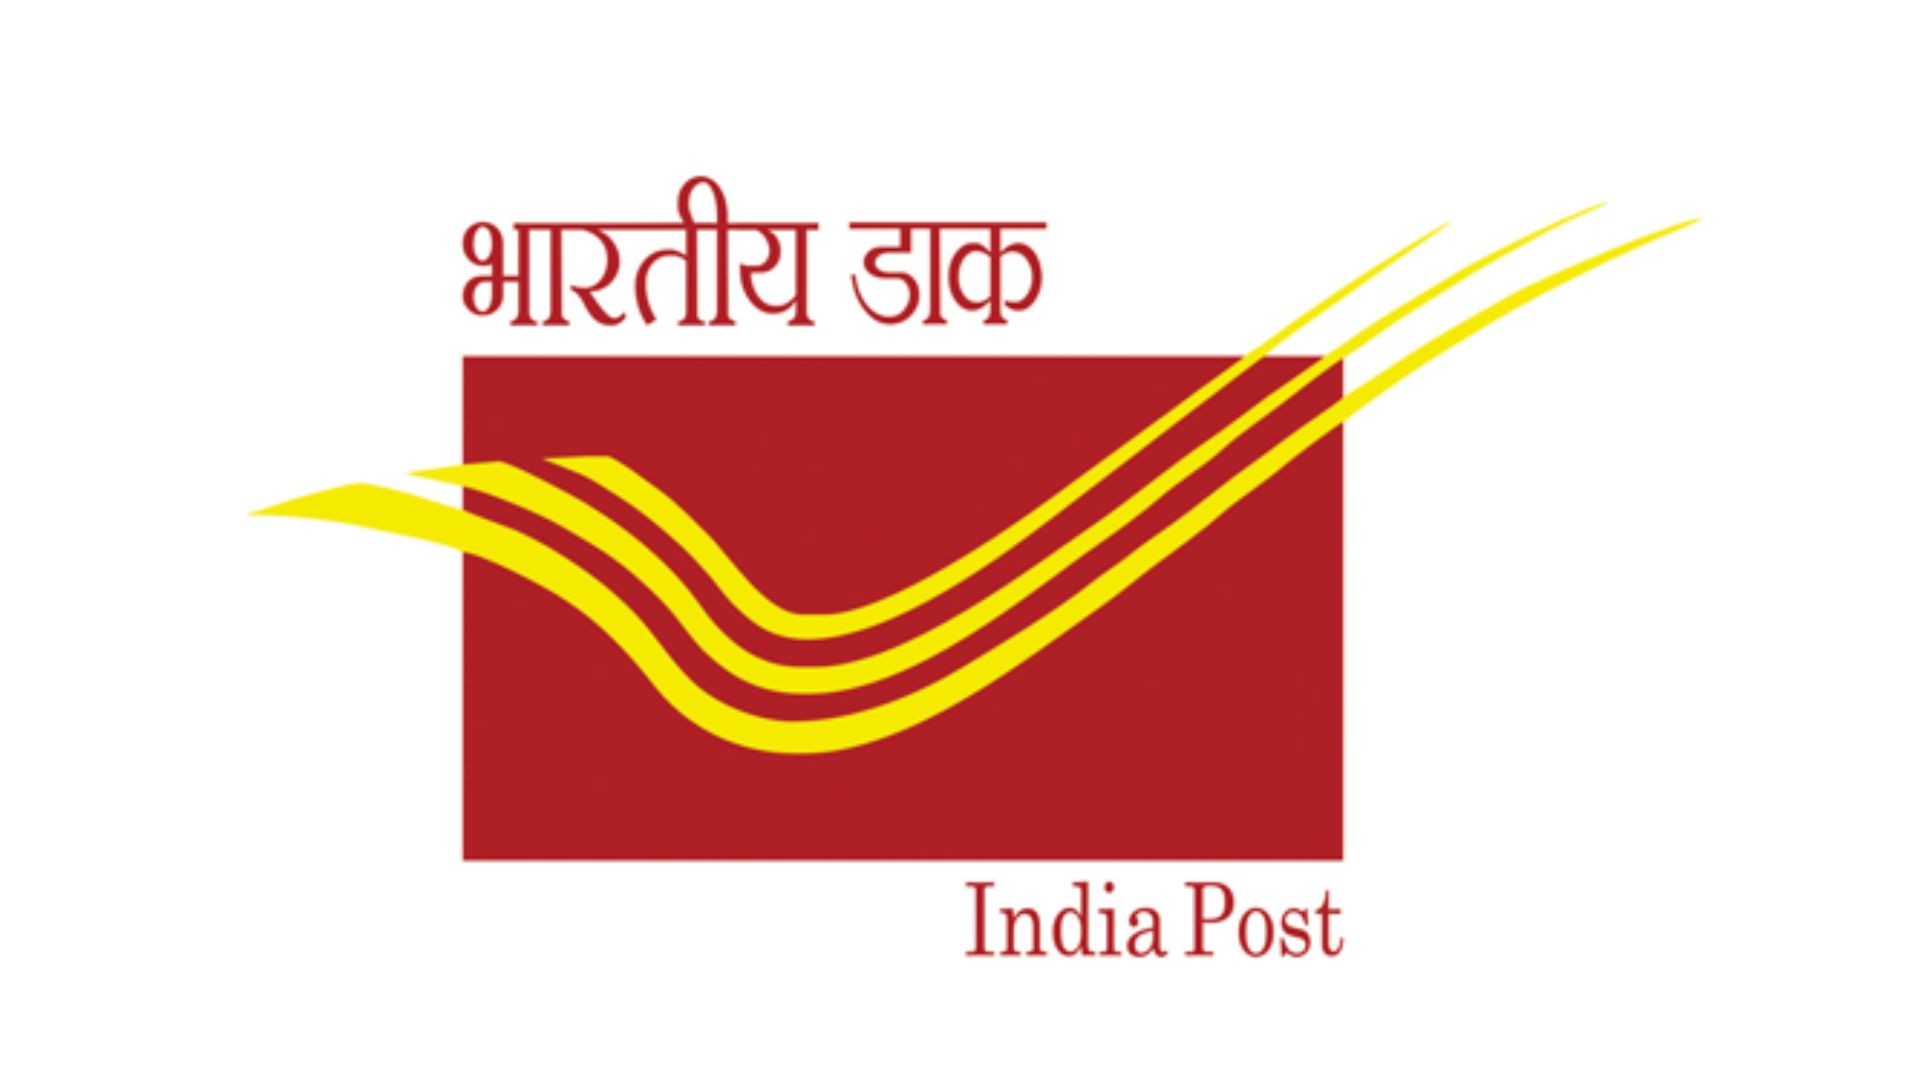 How to Open a Post Office Account Online? All Easy Steps